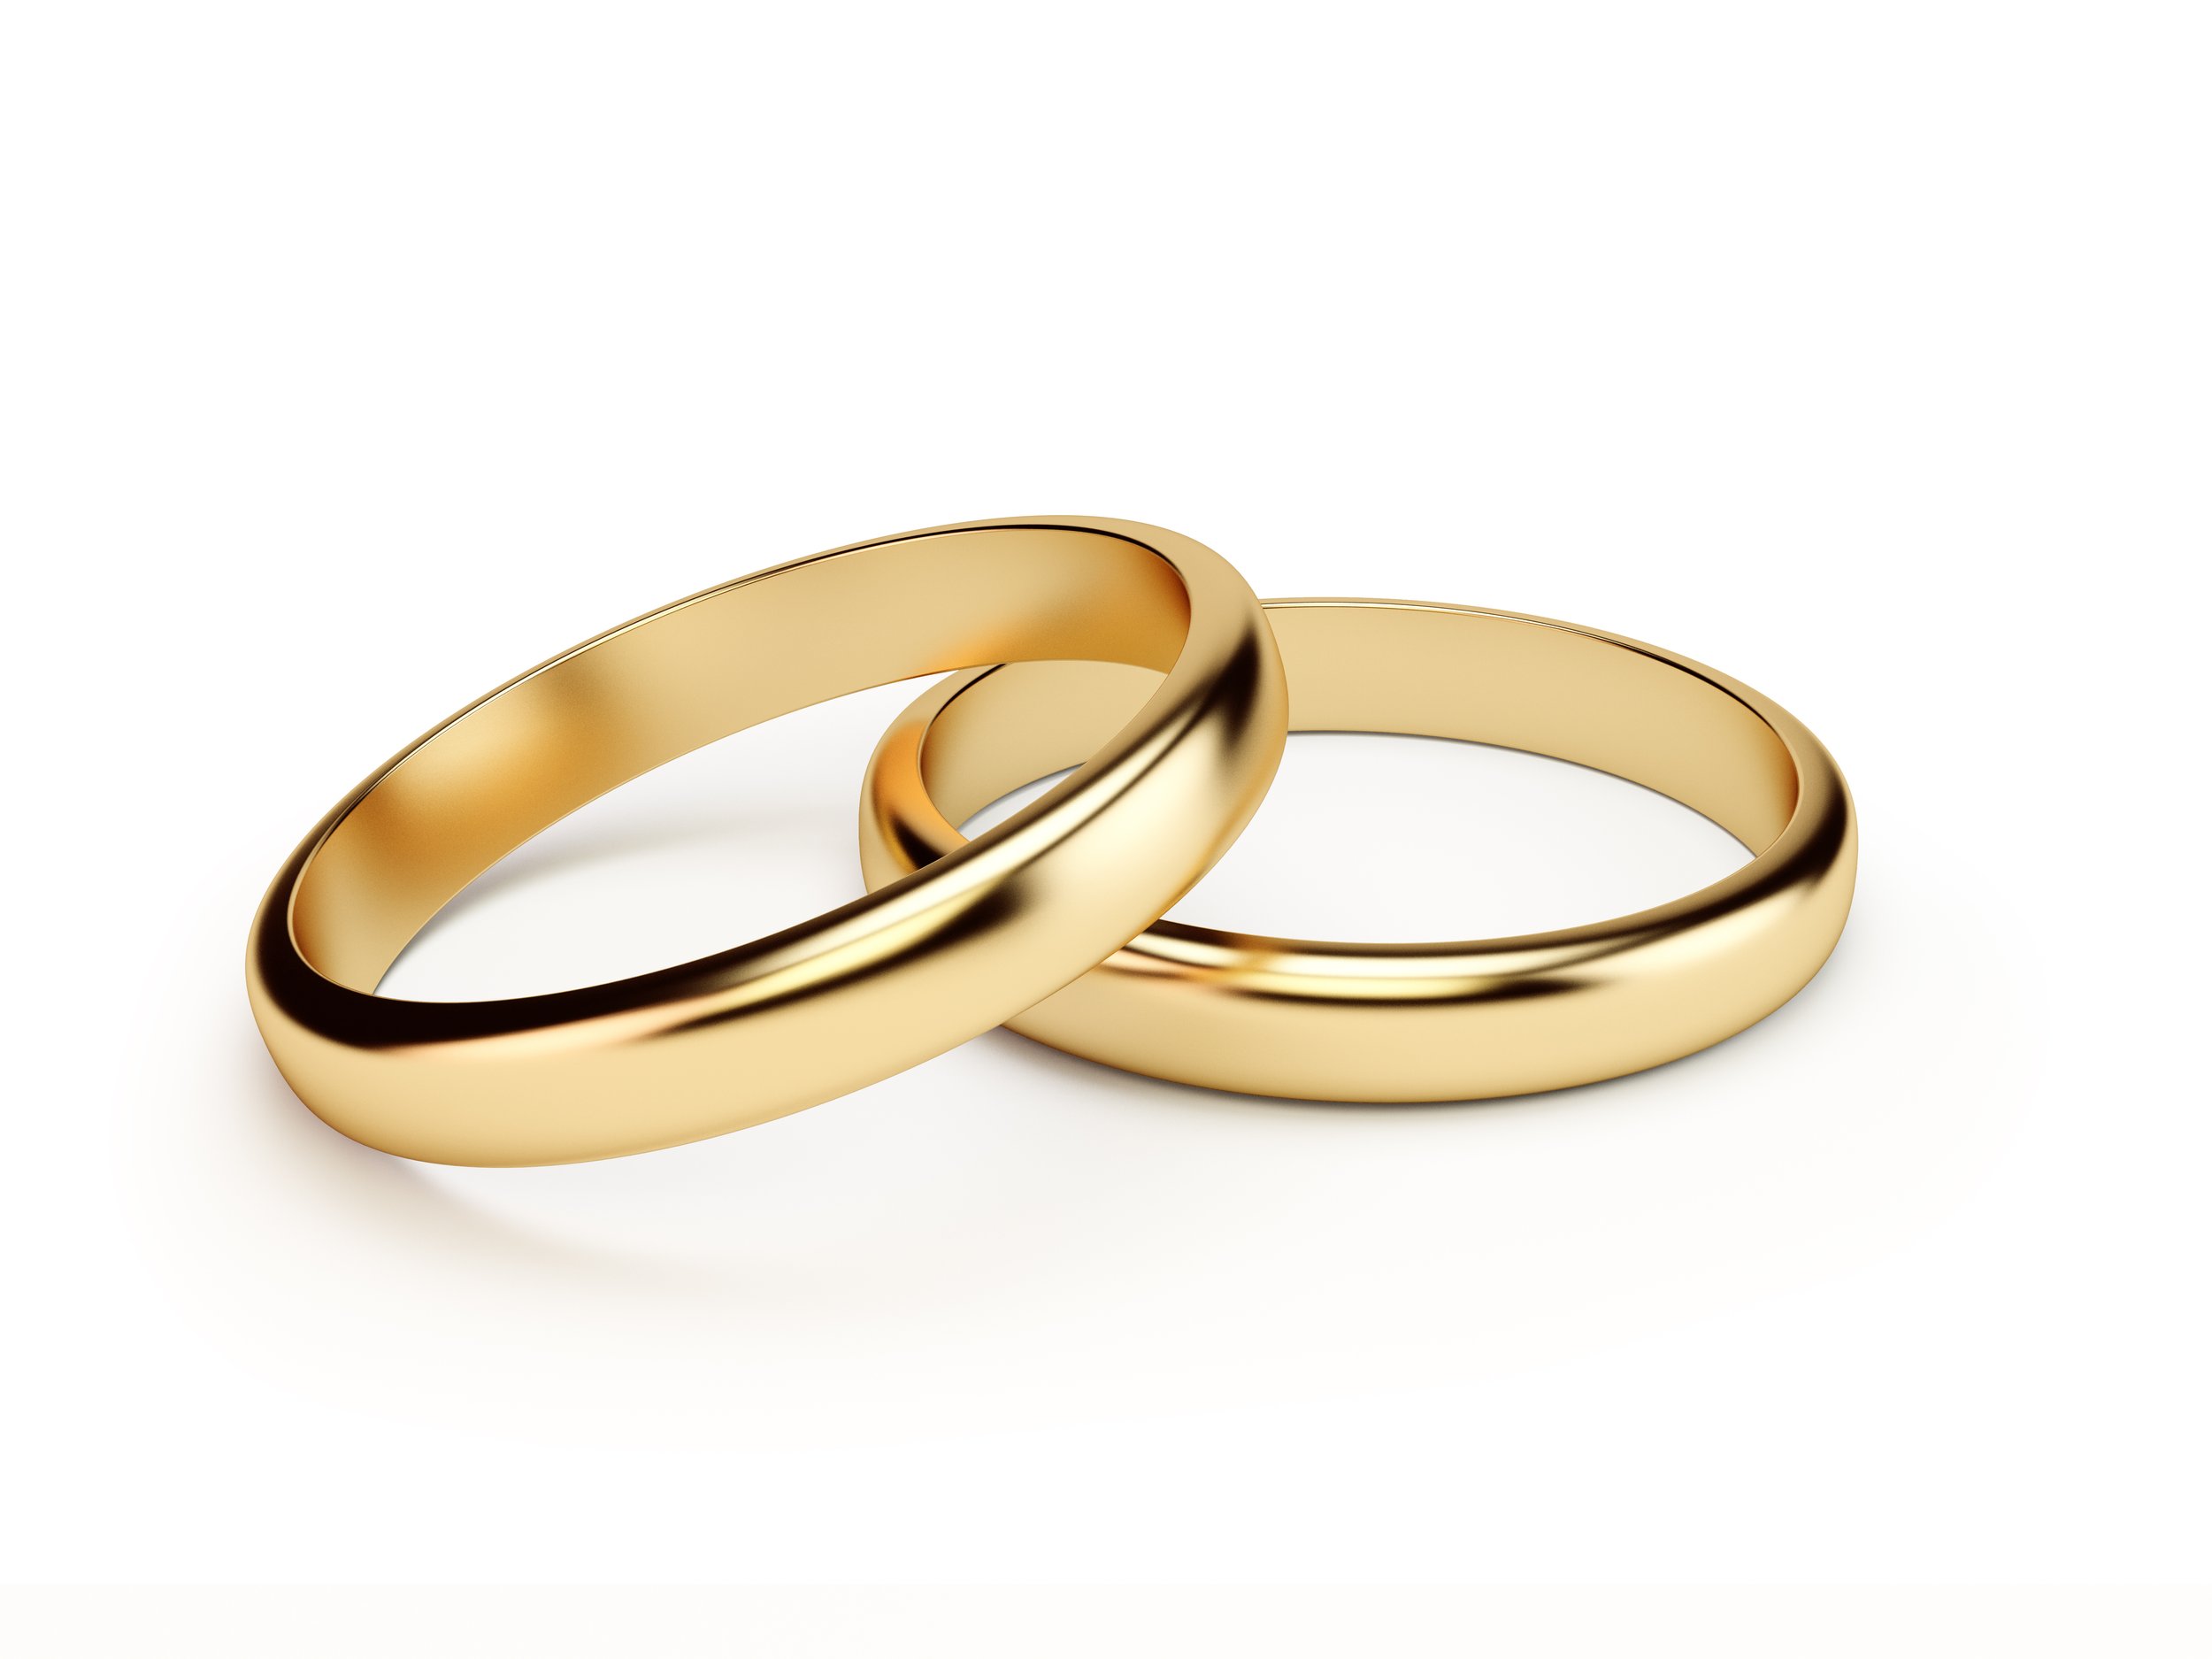 Gold coloured rings